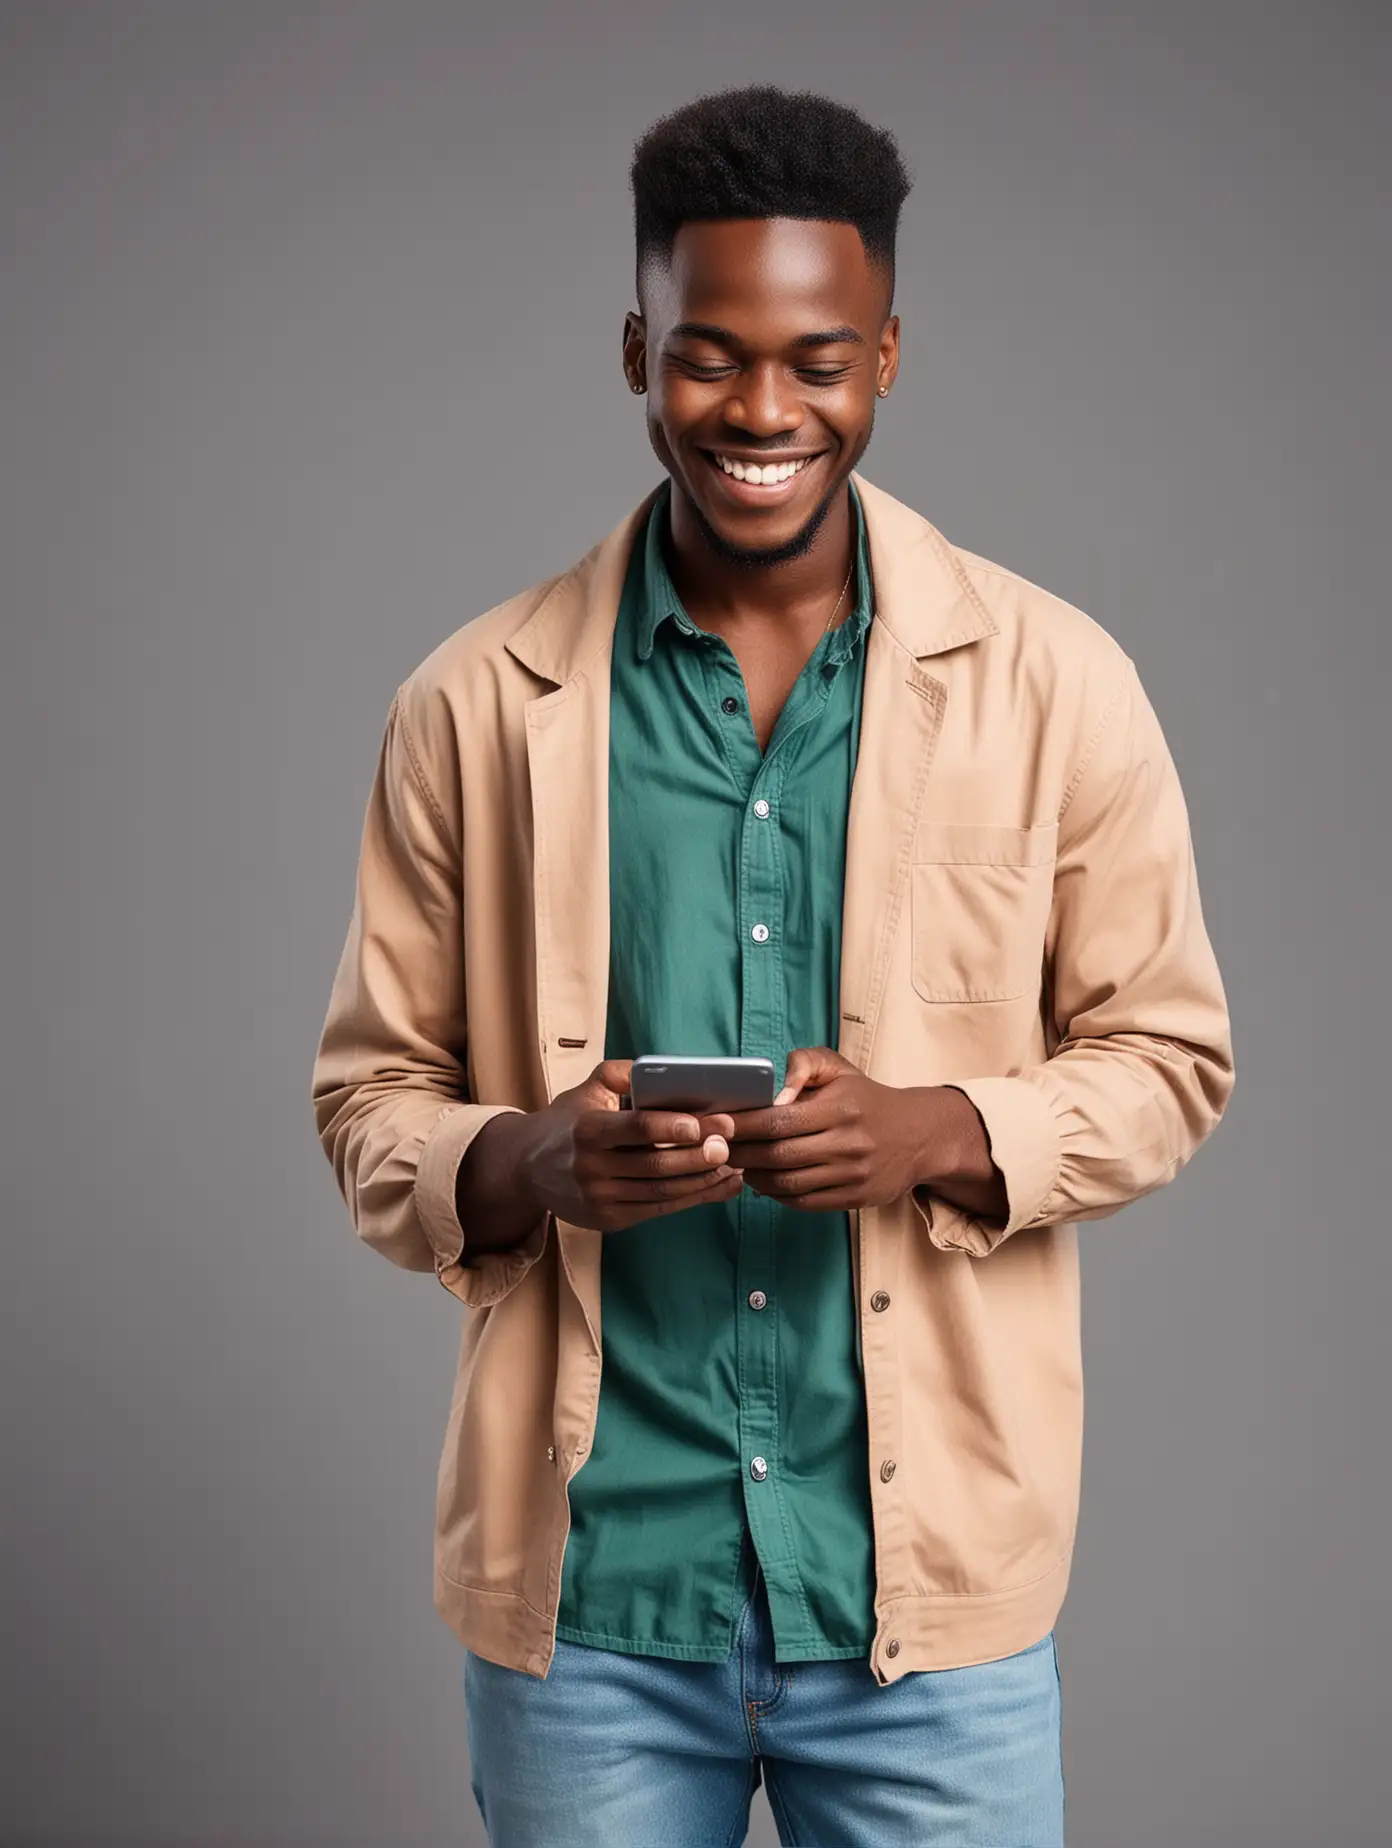 Smiling African Young Man Reading Text on Mobile Phone